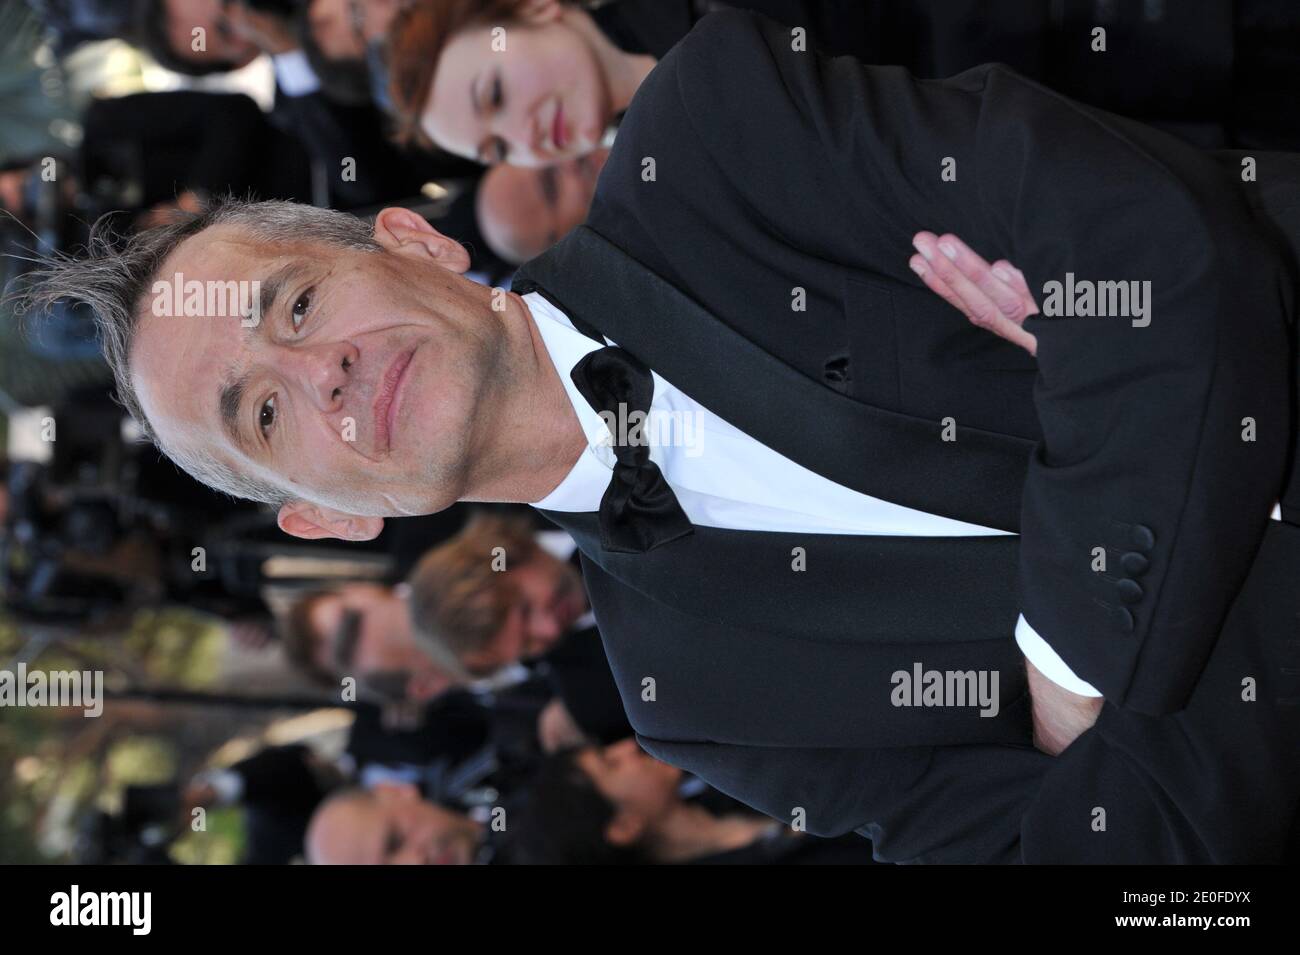 Didier Wampas arriving to the screening of Killing Them Softly, held at the Palais des Festivals in Cannes, France on May 22, 2012 as part of the 65th Cannes Film Festival. Photo by Aurore Marechal/ABACAPRESS.COM Stock Photo